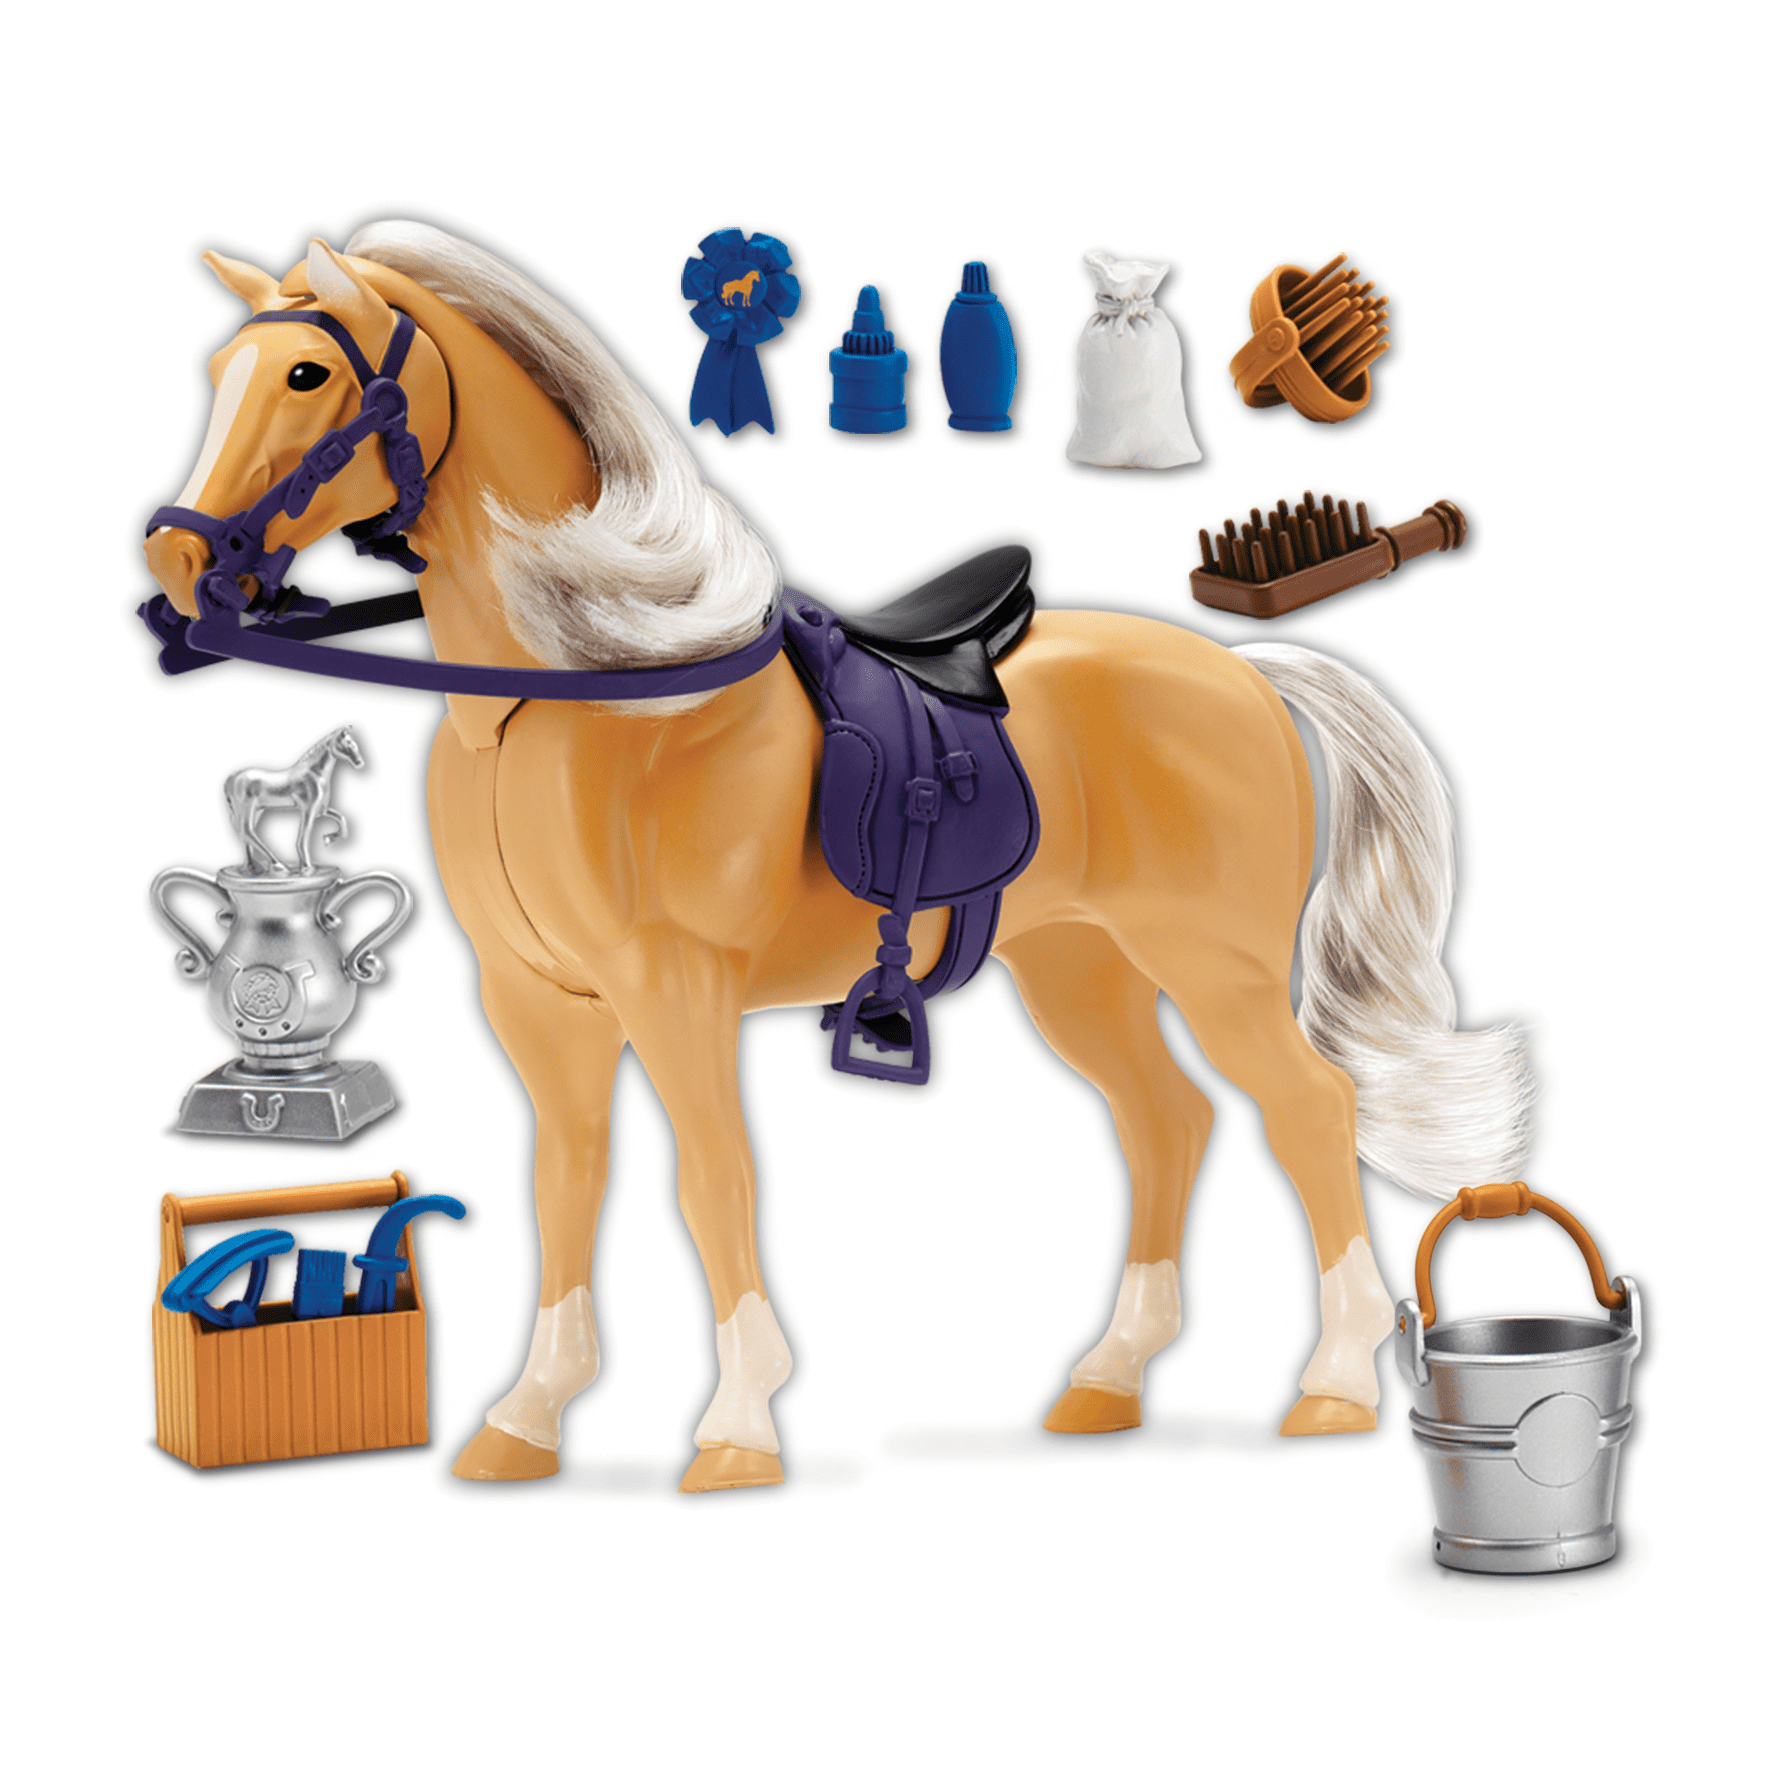 It's Girl Stuff My Pretty Pony Horse Toy With Hair Accessories ~ Green 